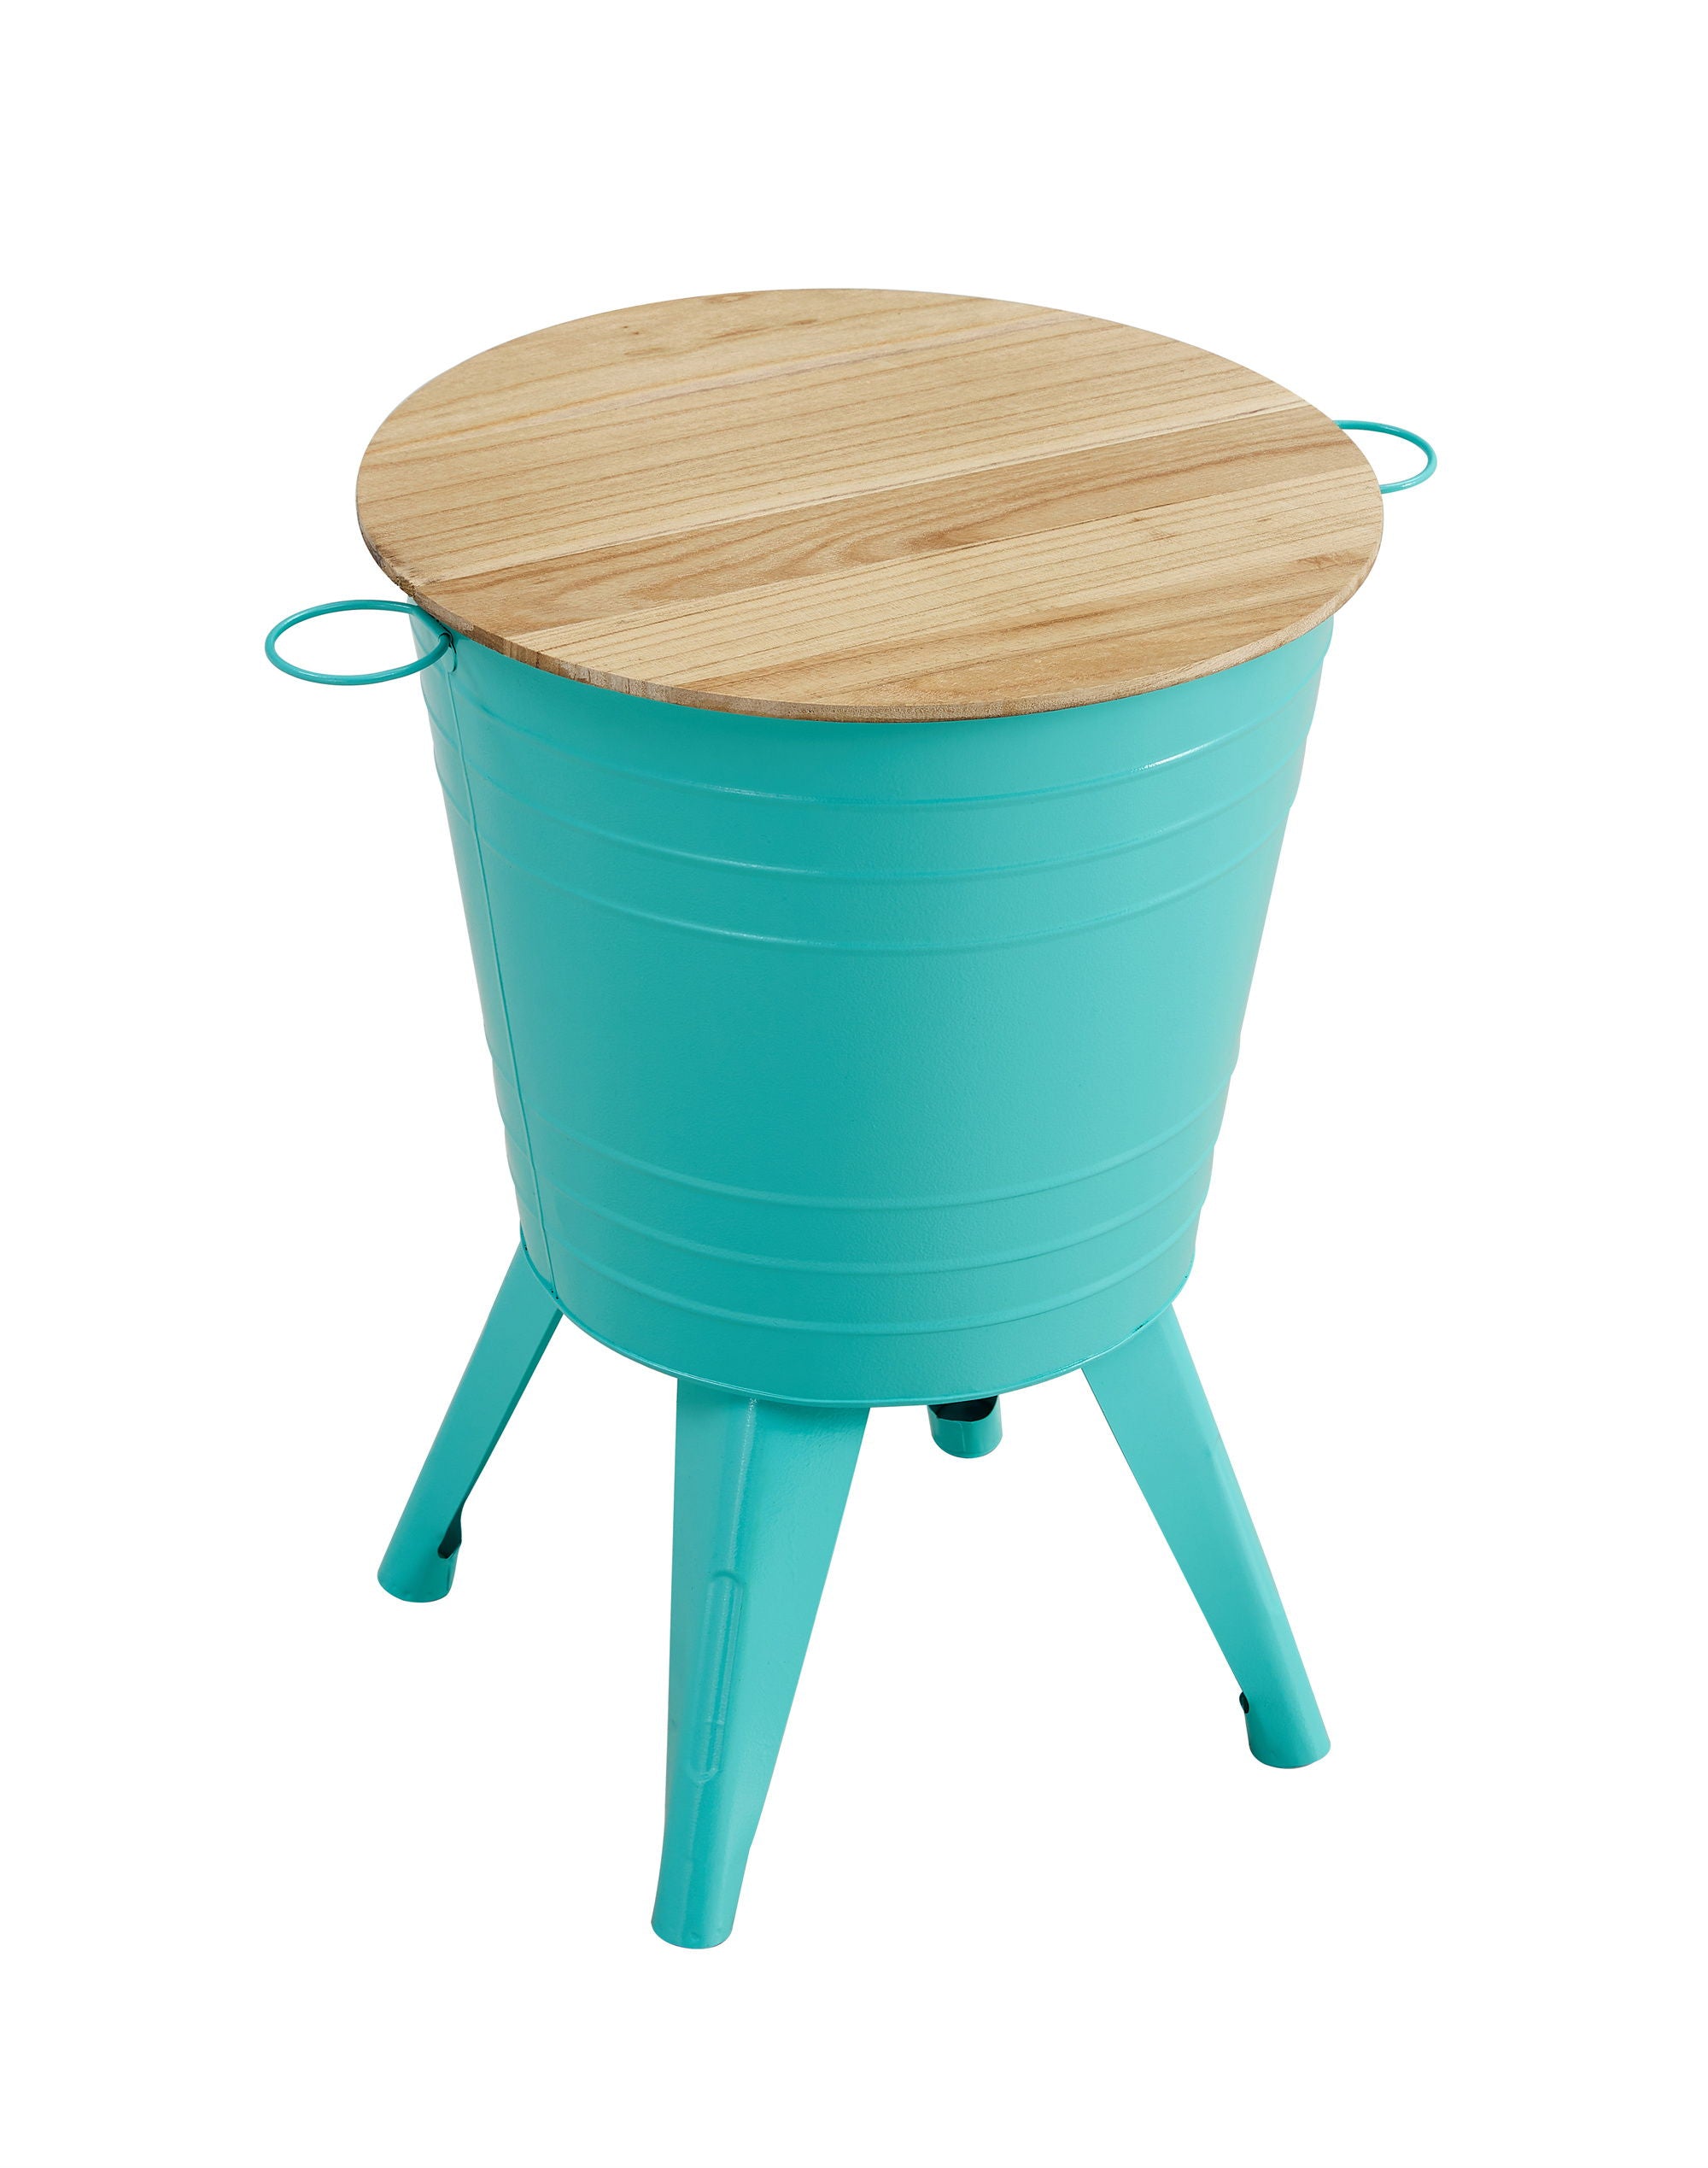 Farmhouse Rustic Distressed Metal Accent Cocktail Table With Wood Top - Turquoise (Set of 2)